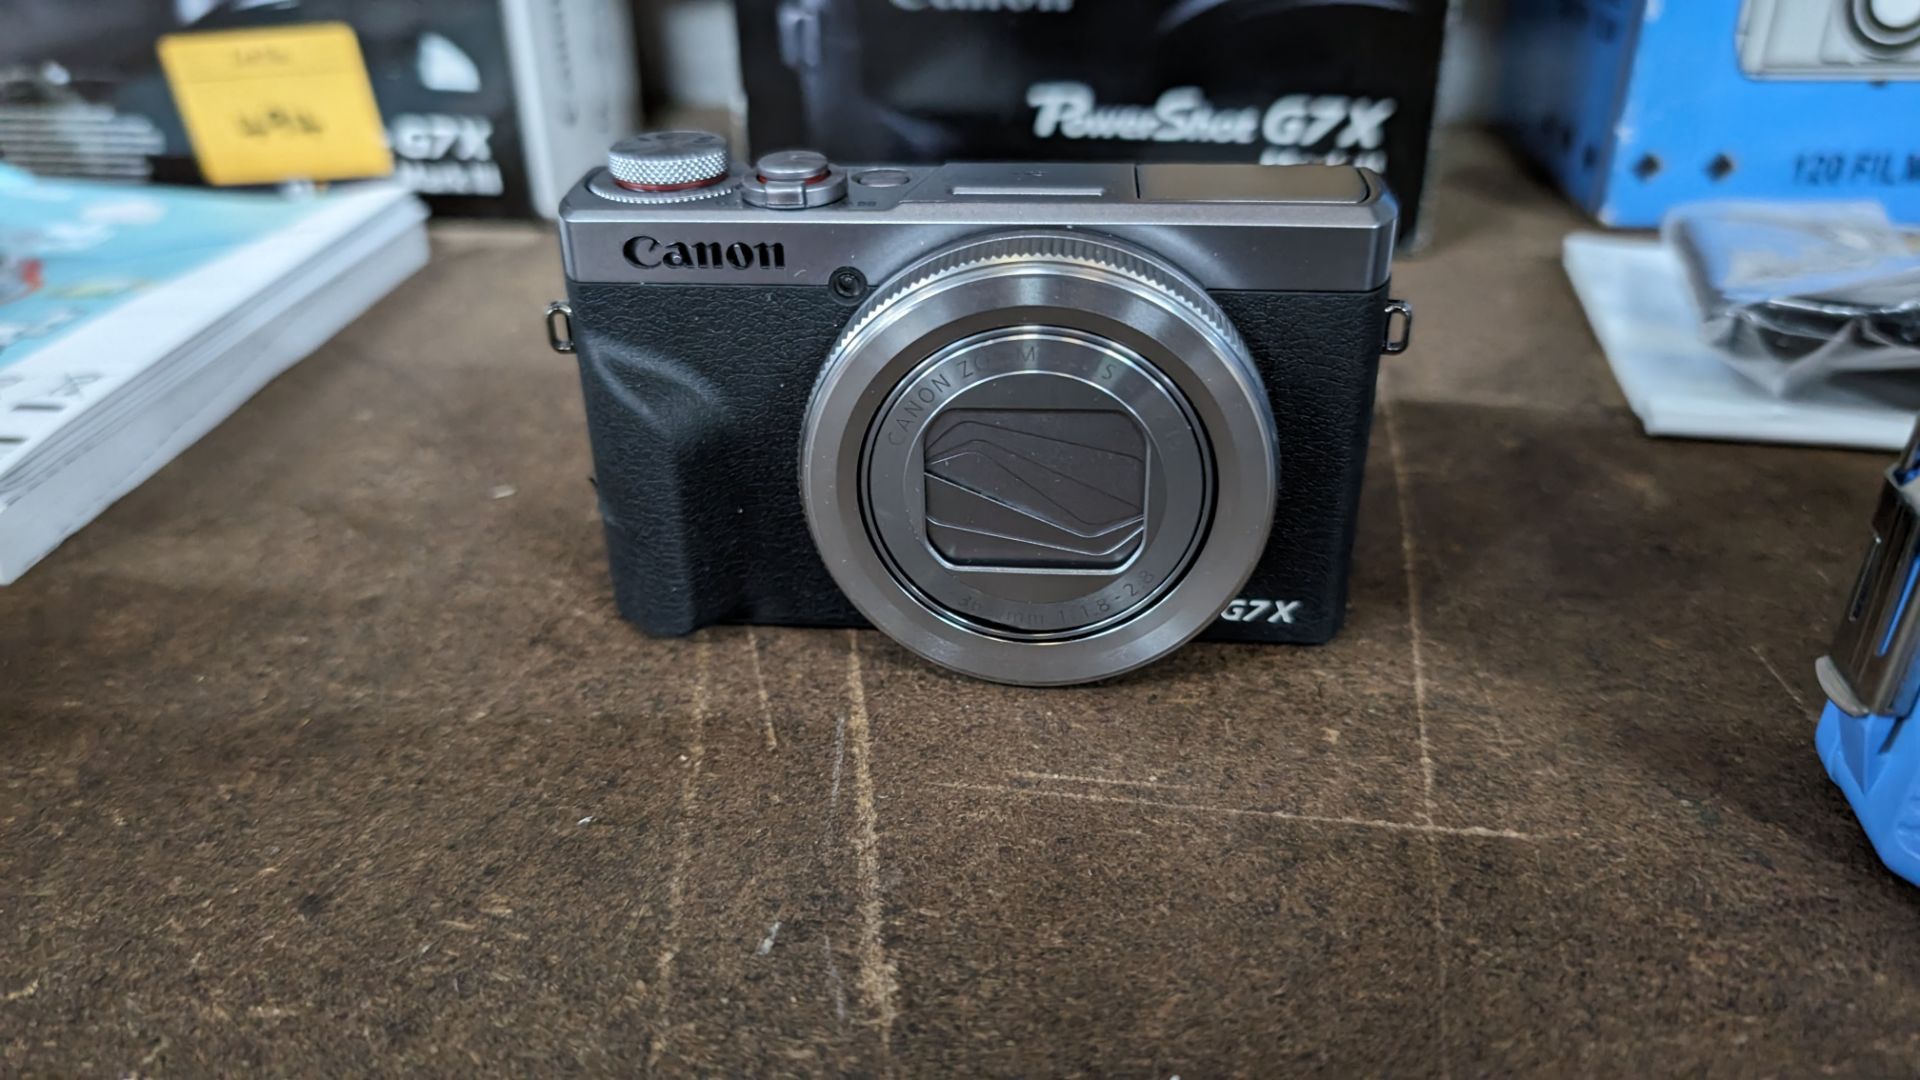 Canon PowerShot G7X Mark II camera, including battery and charger - Bild 4 aus 12